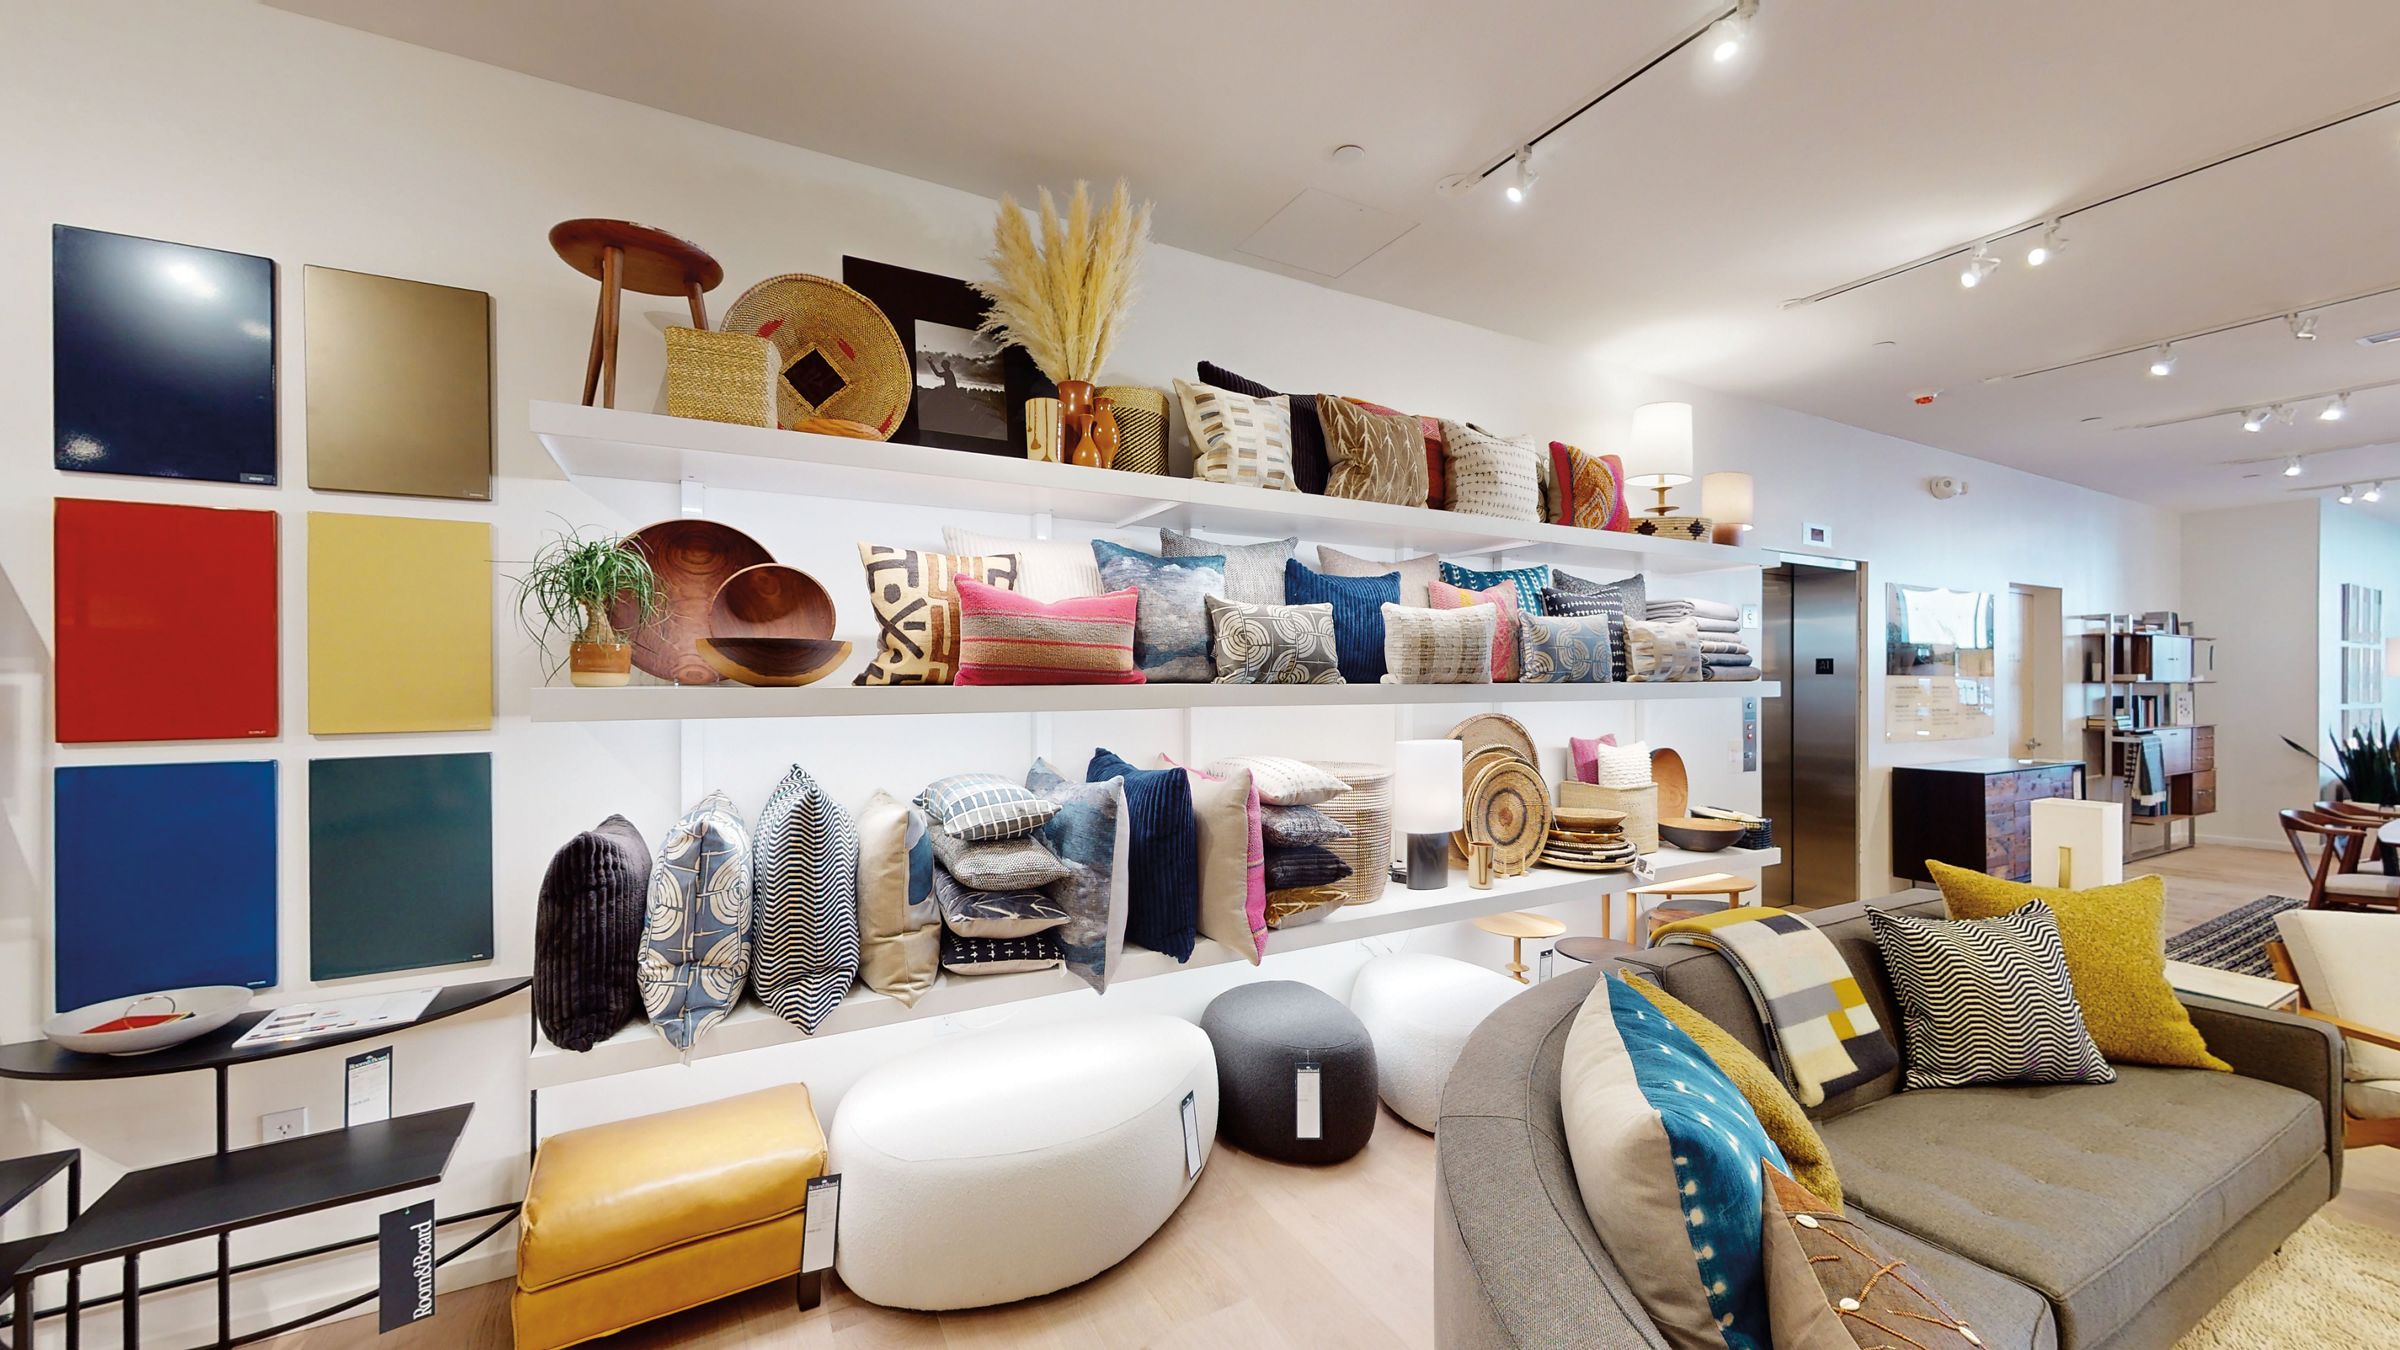 Room and Board store in Paramus, New Jersey showing a display of various pillows and decor.